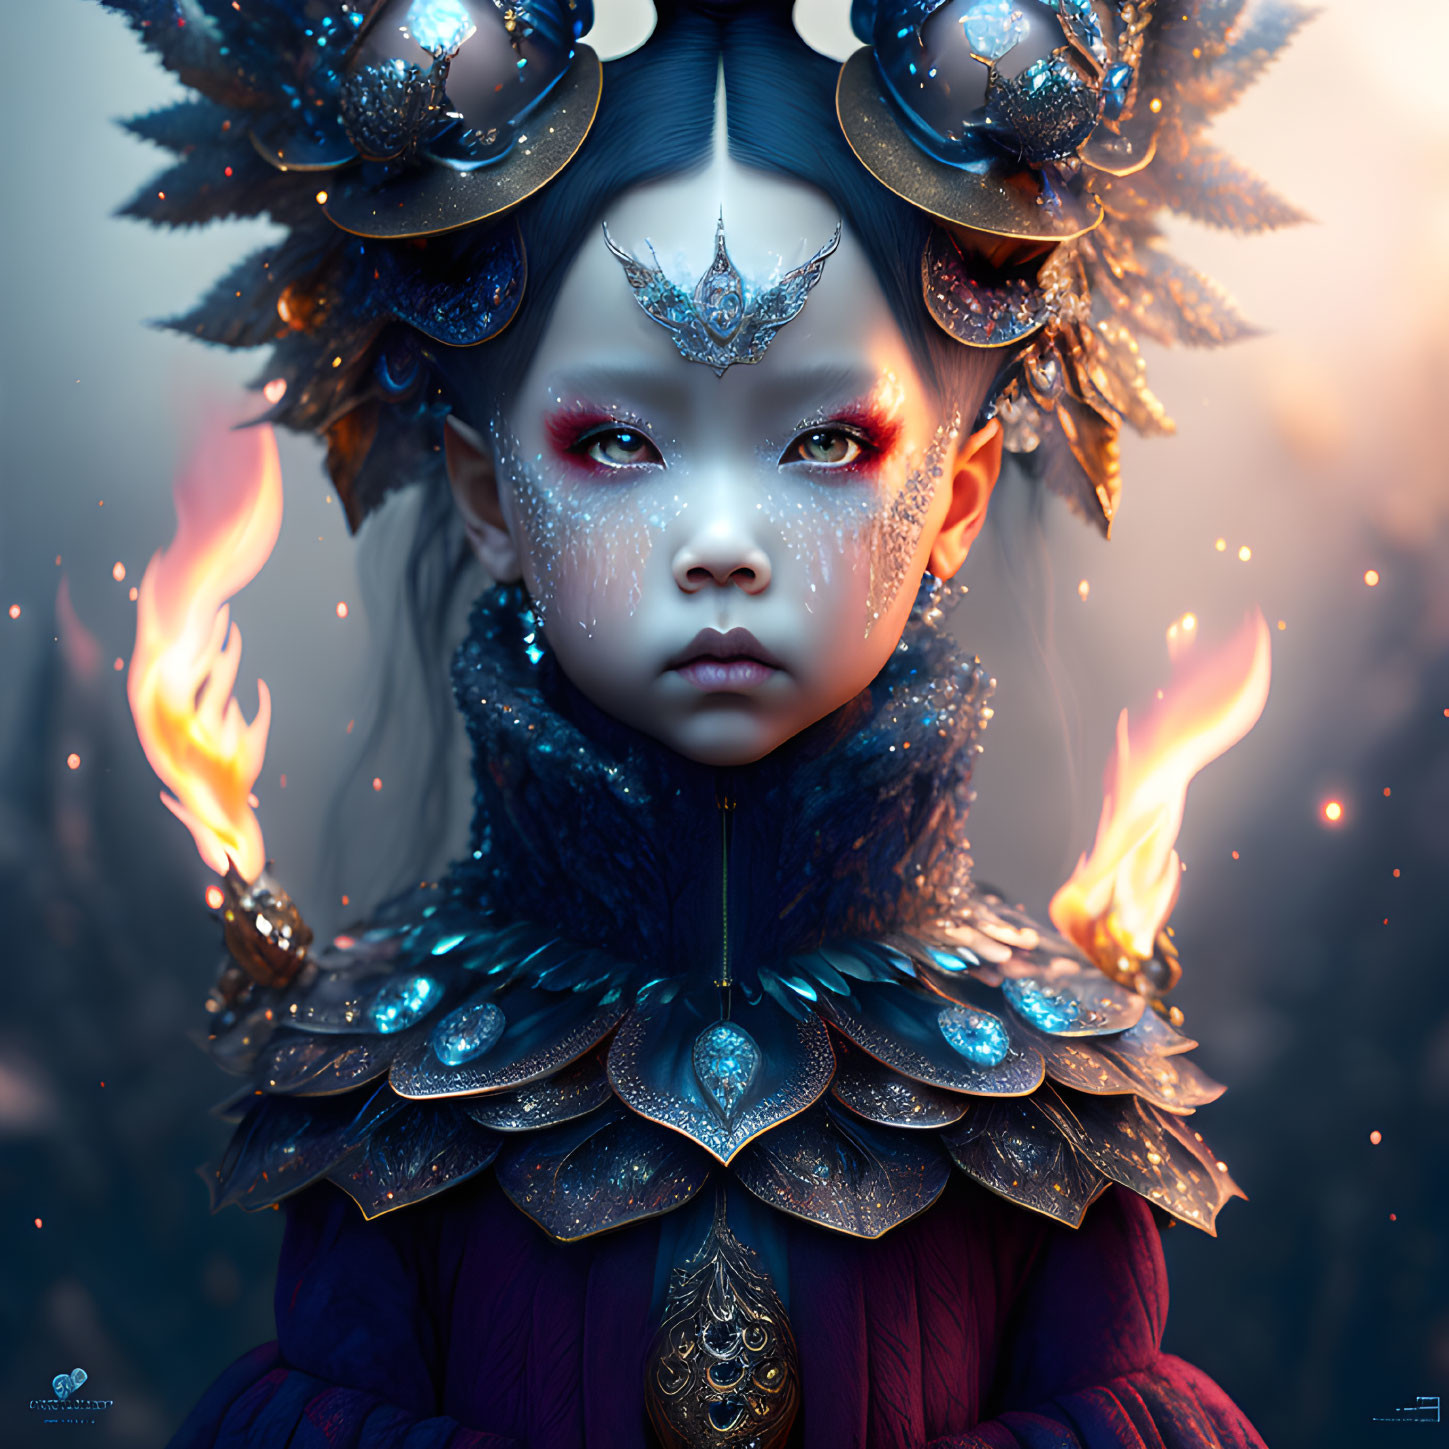 Digital portrait of child with blue and gold crown, red eyes, and flames.